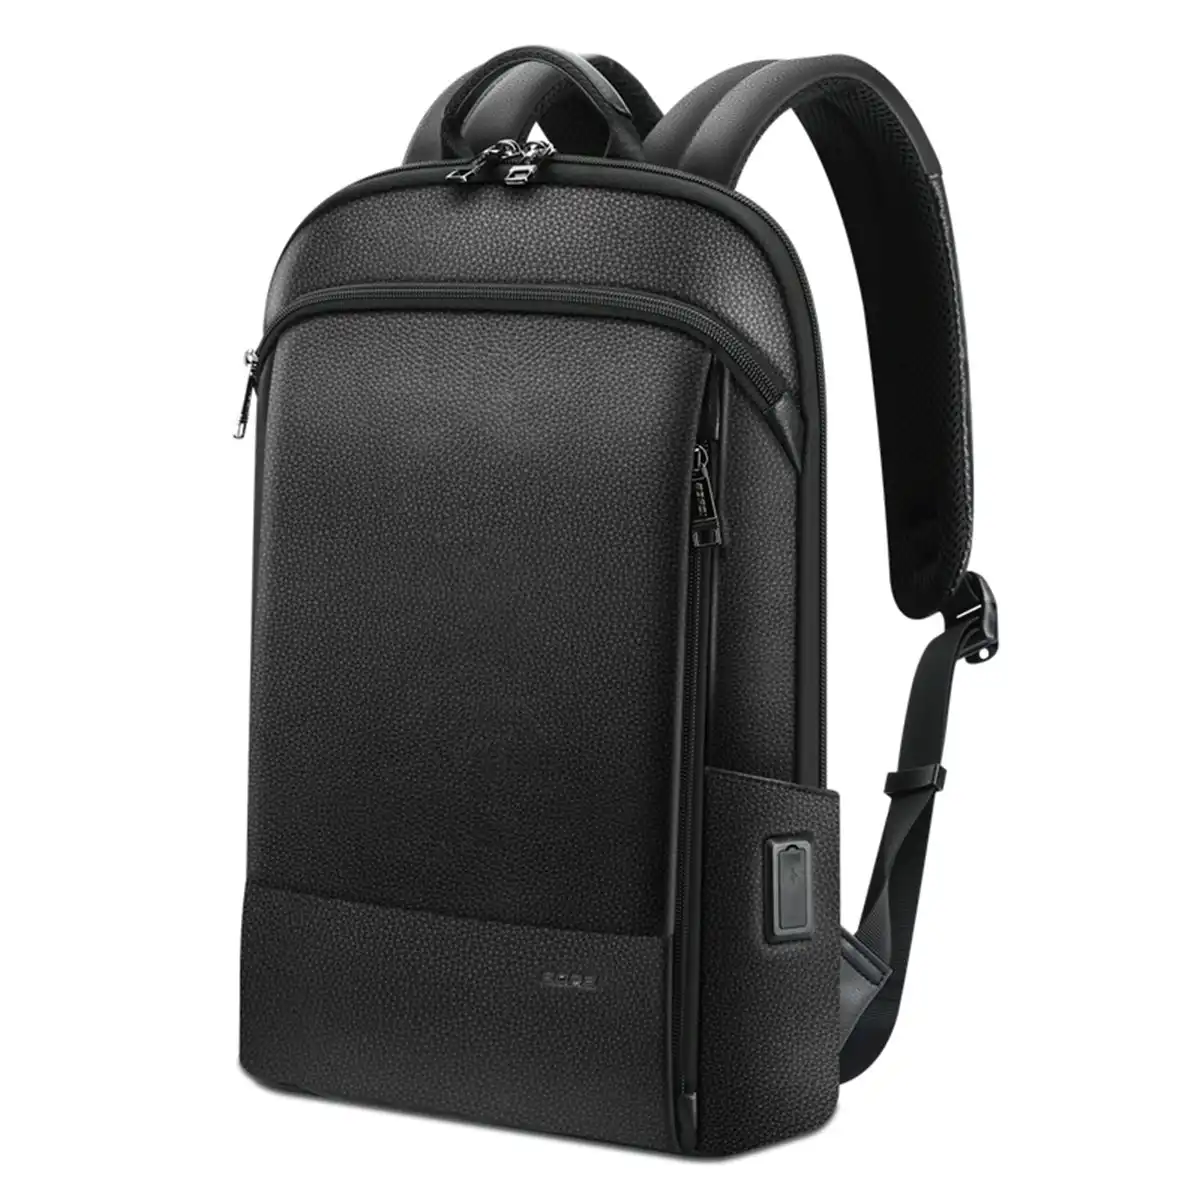 Bopai Anti-Theft Smart Laptop Backpack & Usb Charging Luxury Leather Business Travel Backpack Black B52711